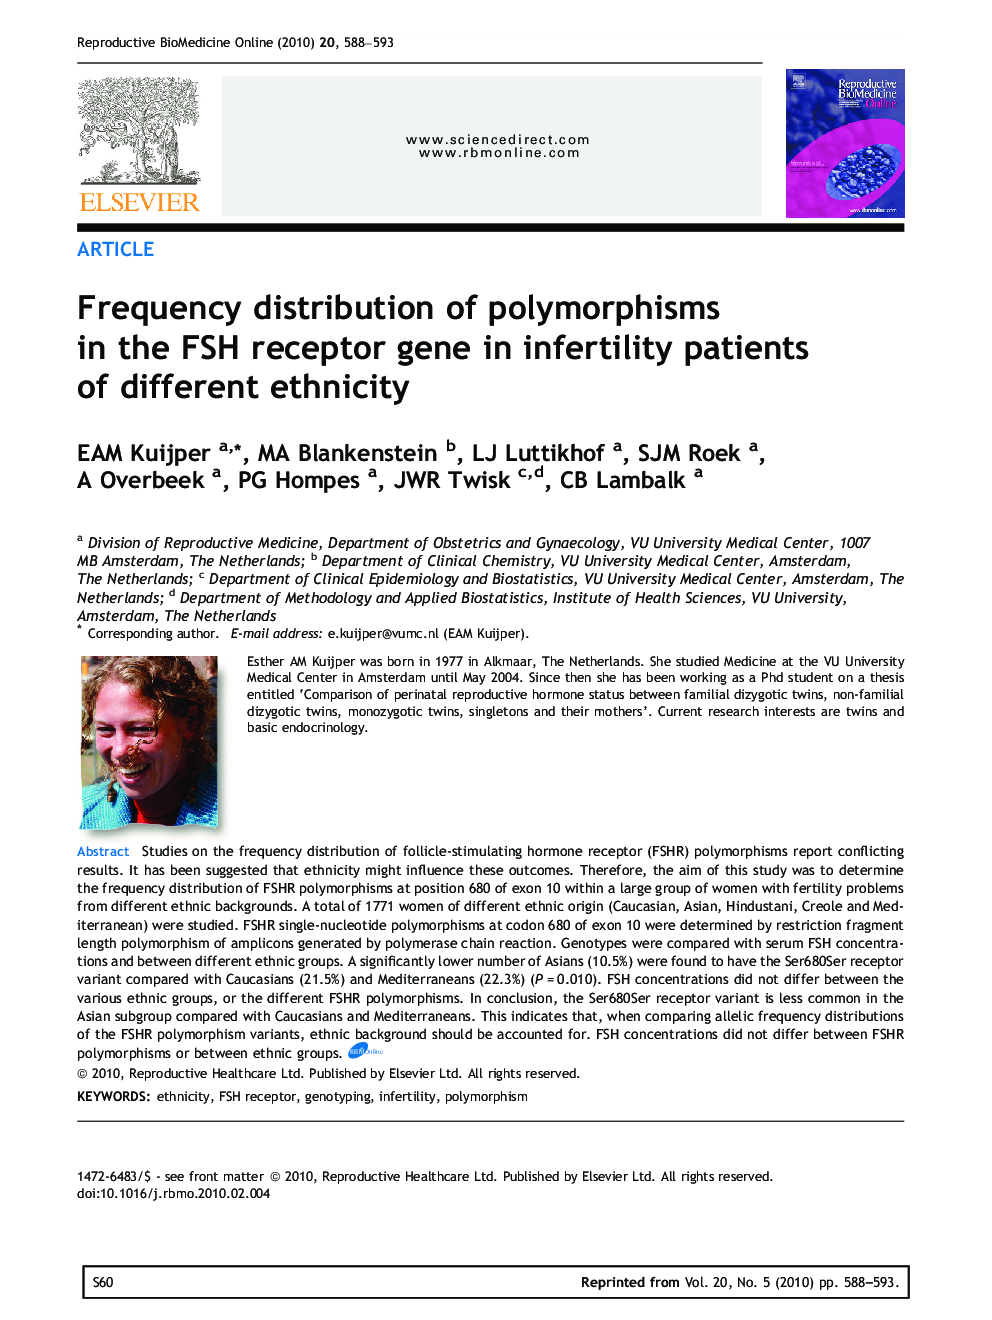 Frequency distribution of polymorphisms in the FSH receptor gene in infertility patients of different ethnicity 